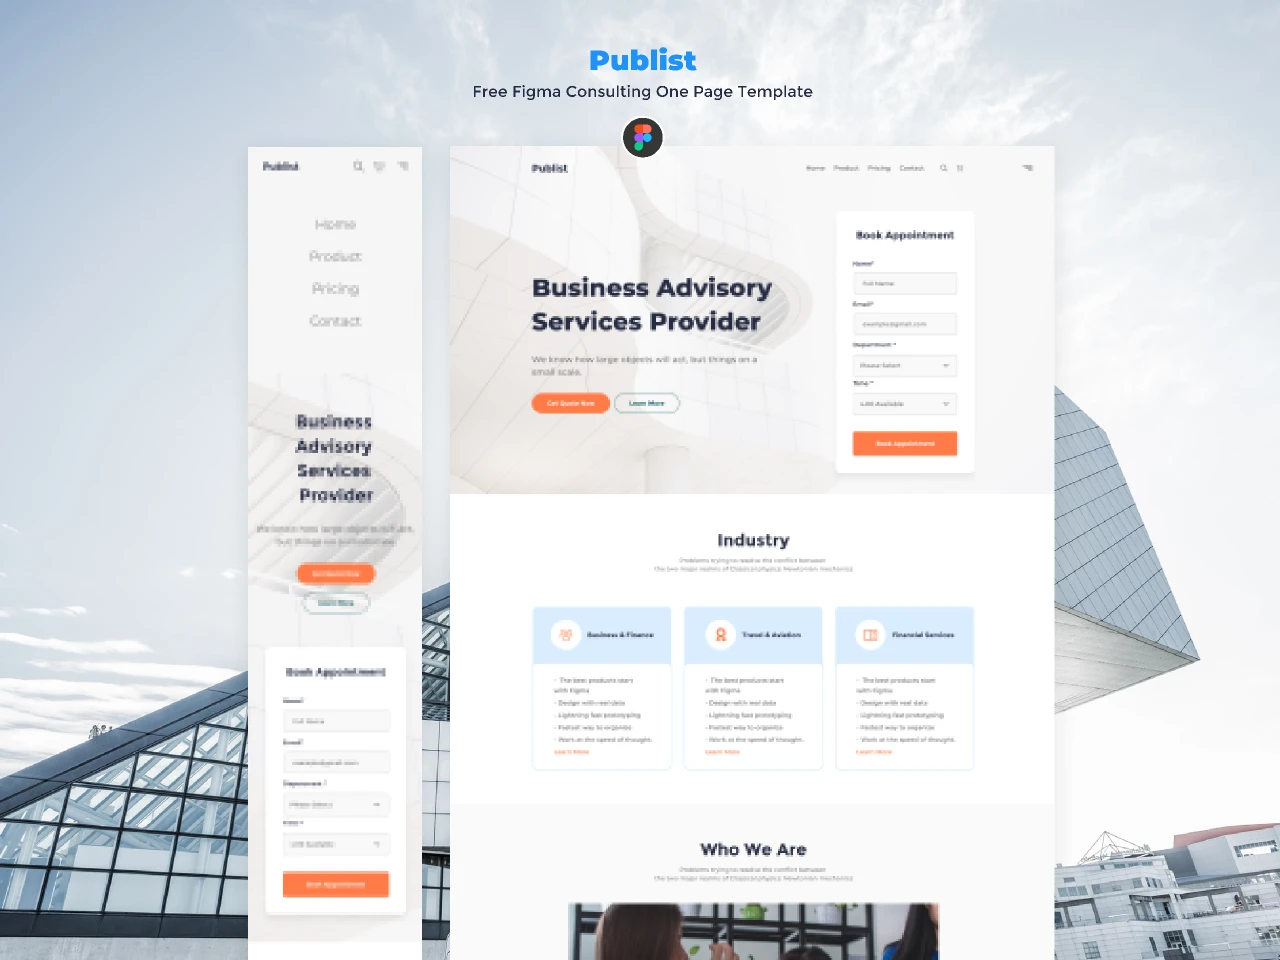 Publist - Free Figma Consulting One Page Template for Figma and Adobe XD